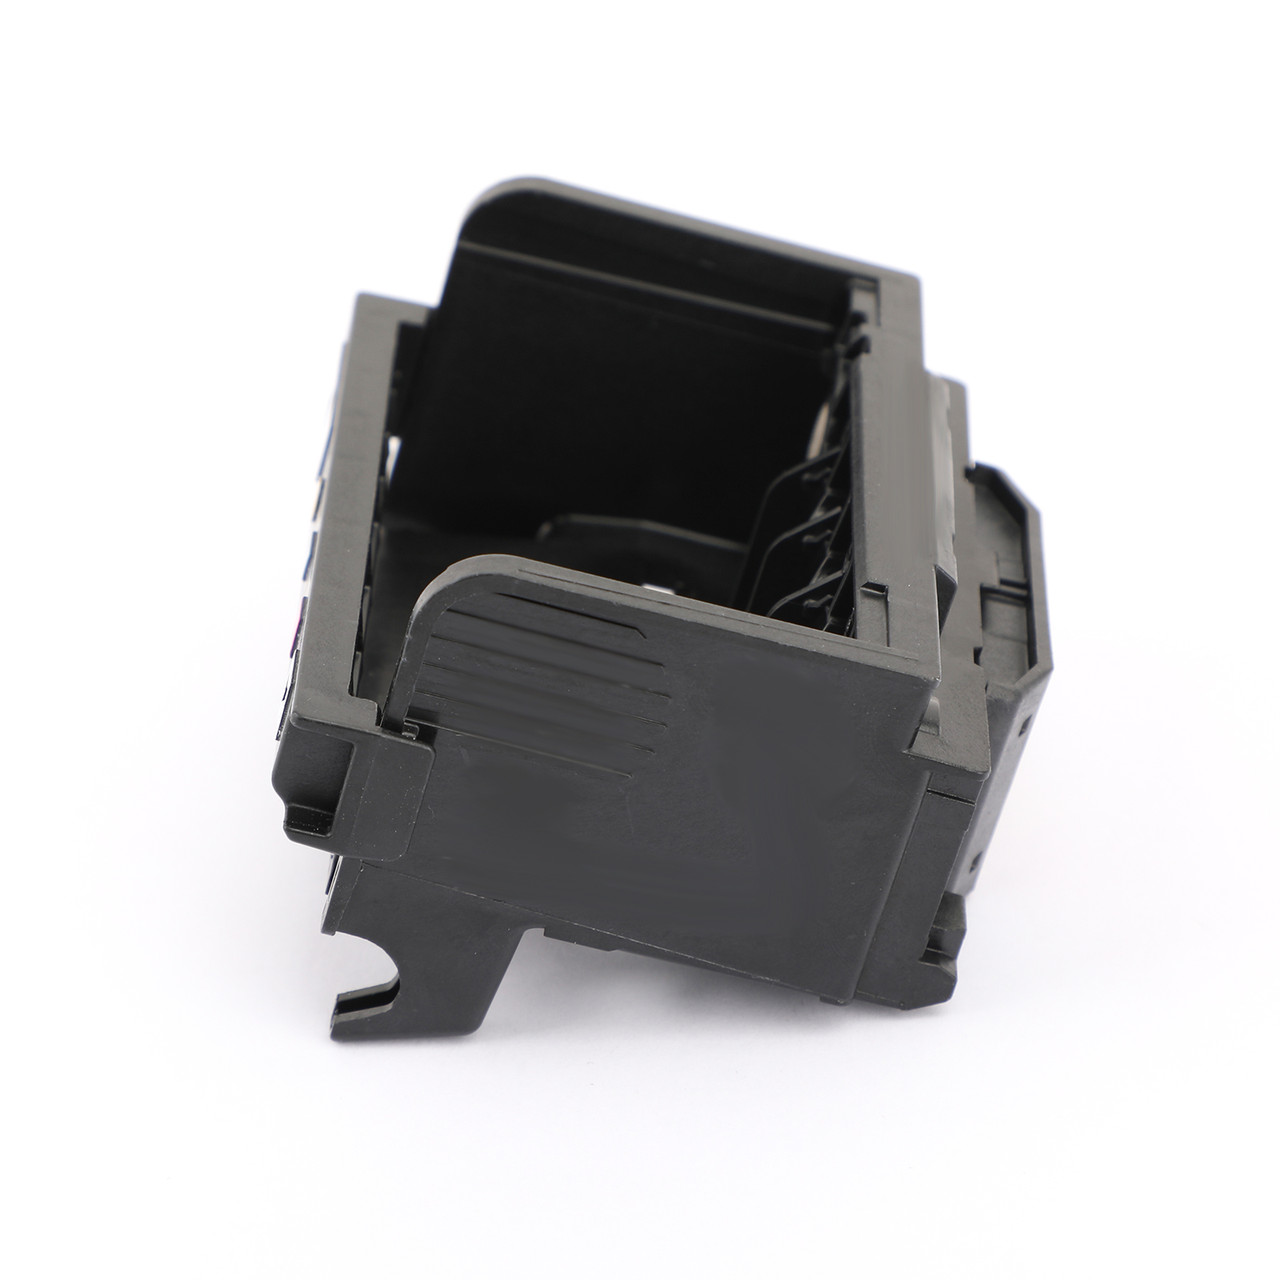 Hot Selling 564 Printhead fit for HP 5468 C5388 C6380 D7560 309A C410 8558 CB326-30002